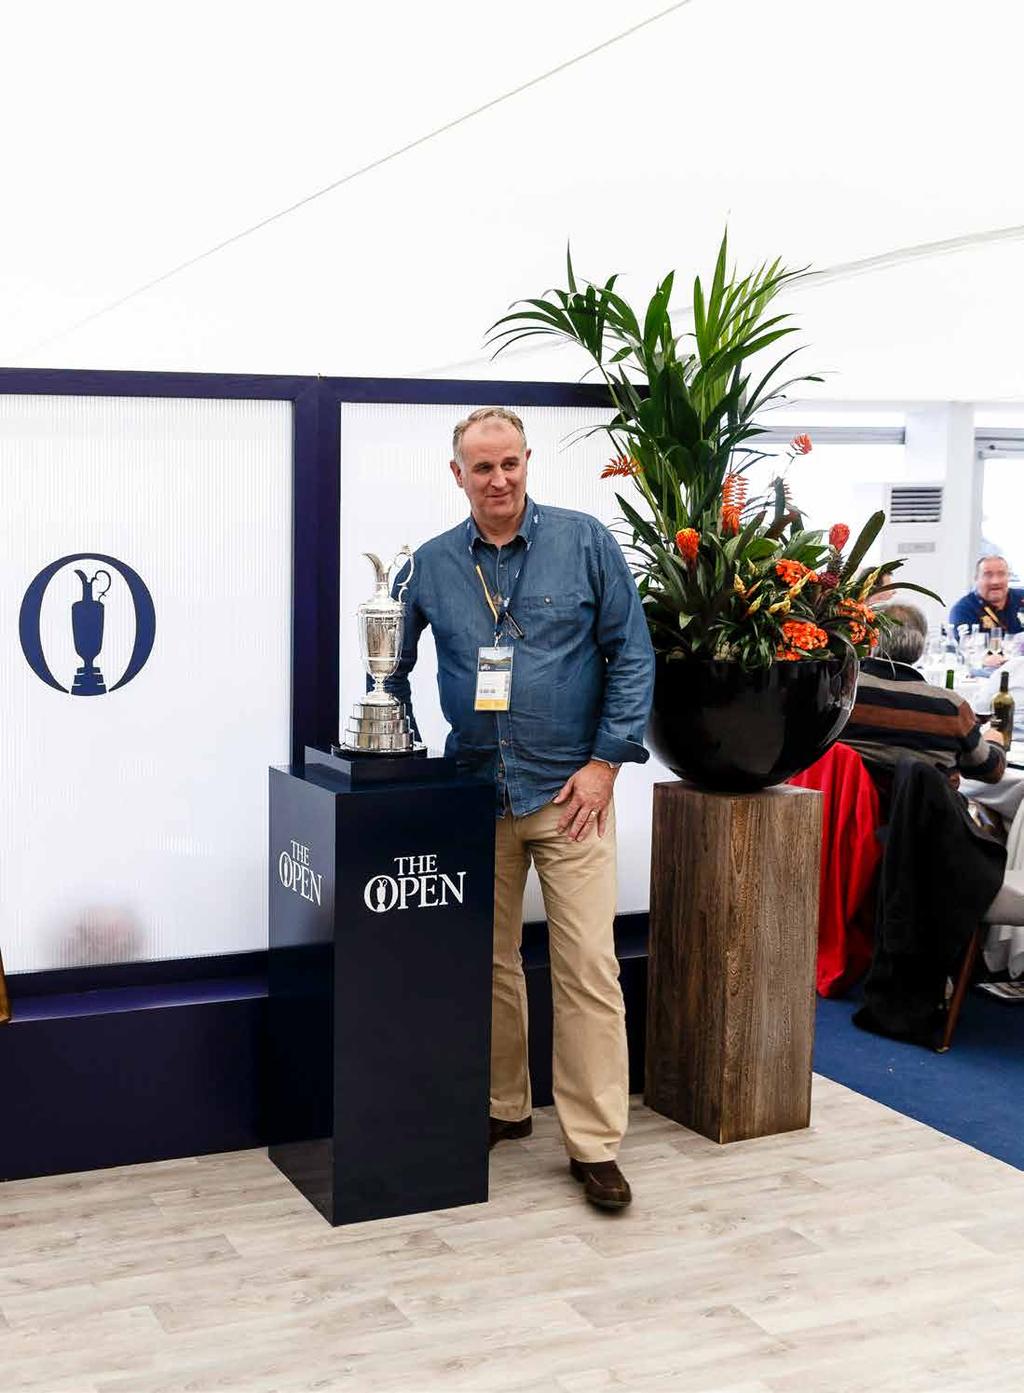 THE CLARET JUG PAV I L I ON Entertaining guests at The Claret Jug Pavilion is the most exclusive hospitality experience at The 147 th Open.